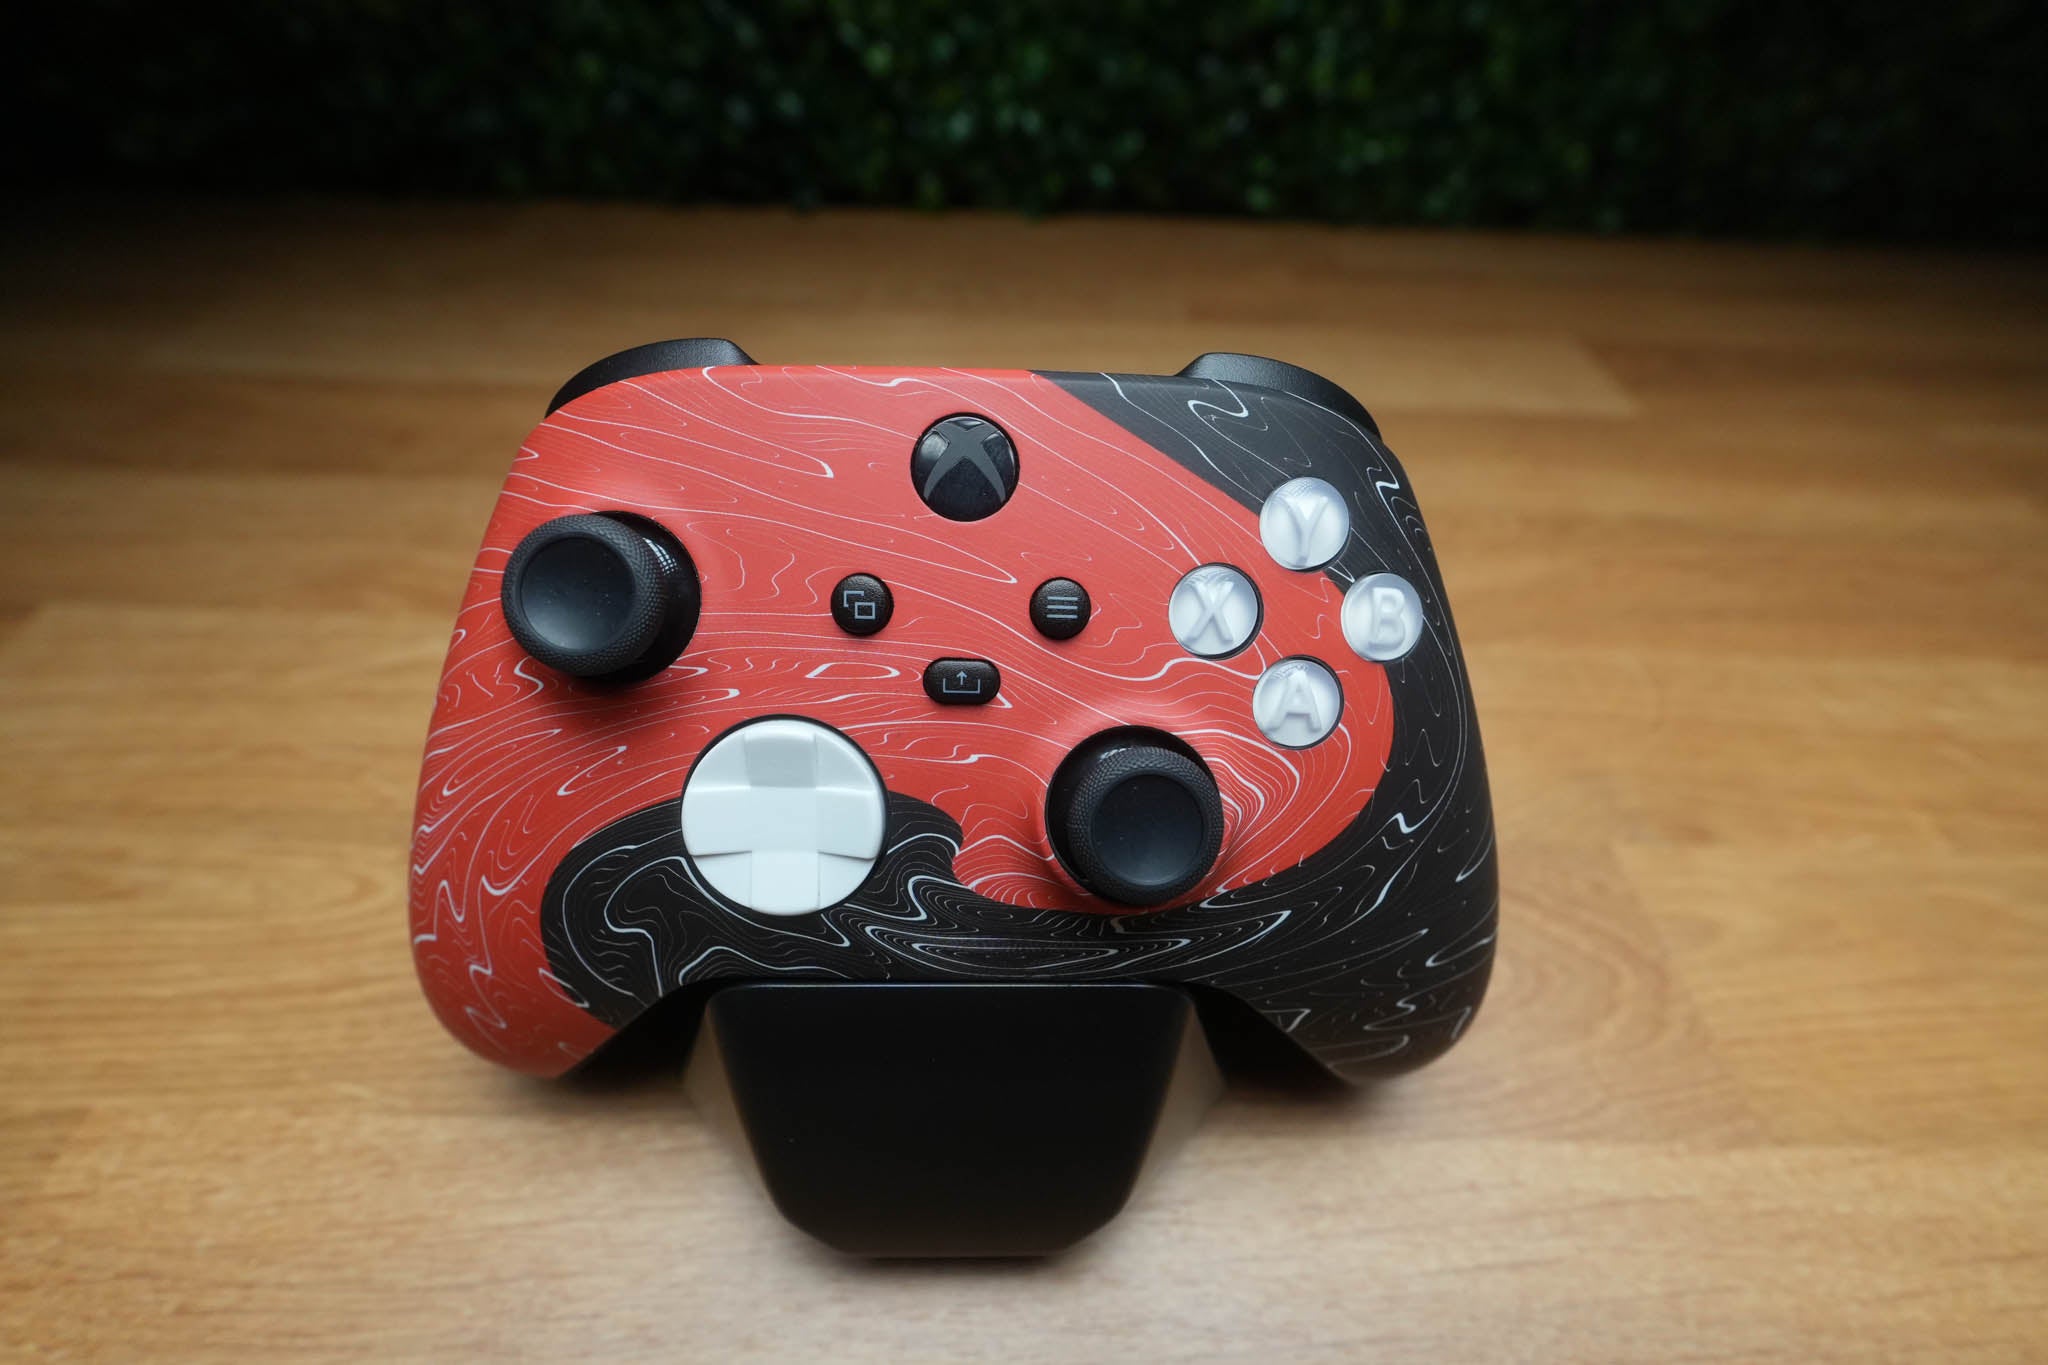 Clearance Sale Pro Cinch Xbox #516 - Cinch Gaming